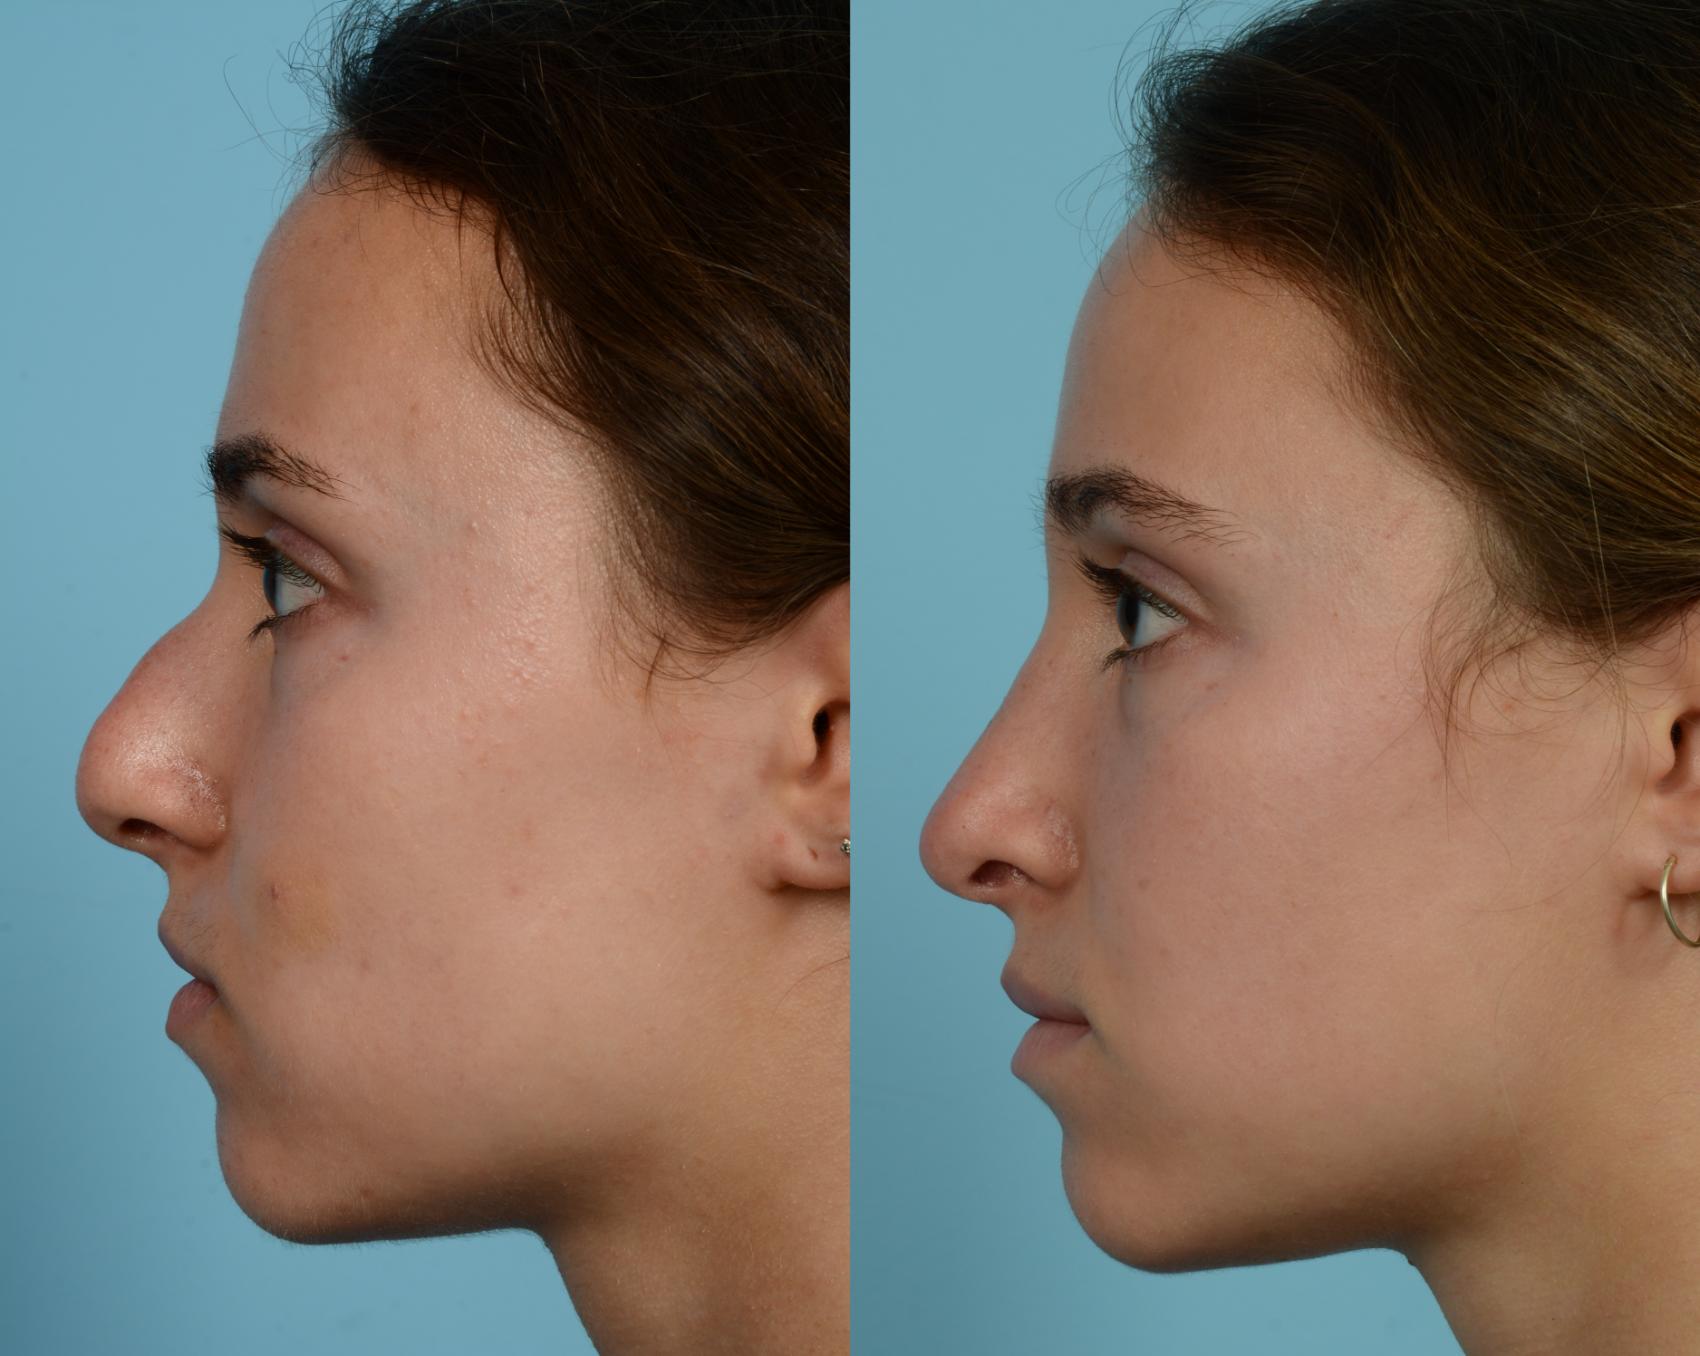 Dr. Mustoe in Chicago performed Rhinoplasty on a female age 18-24 years of age.